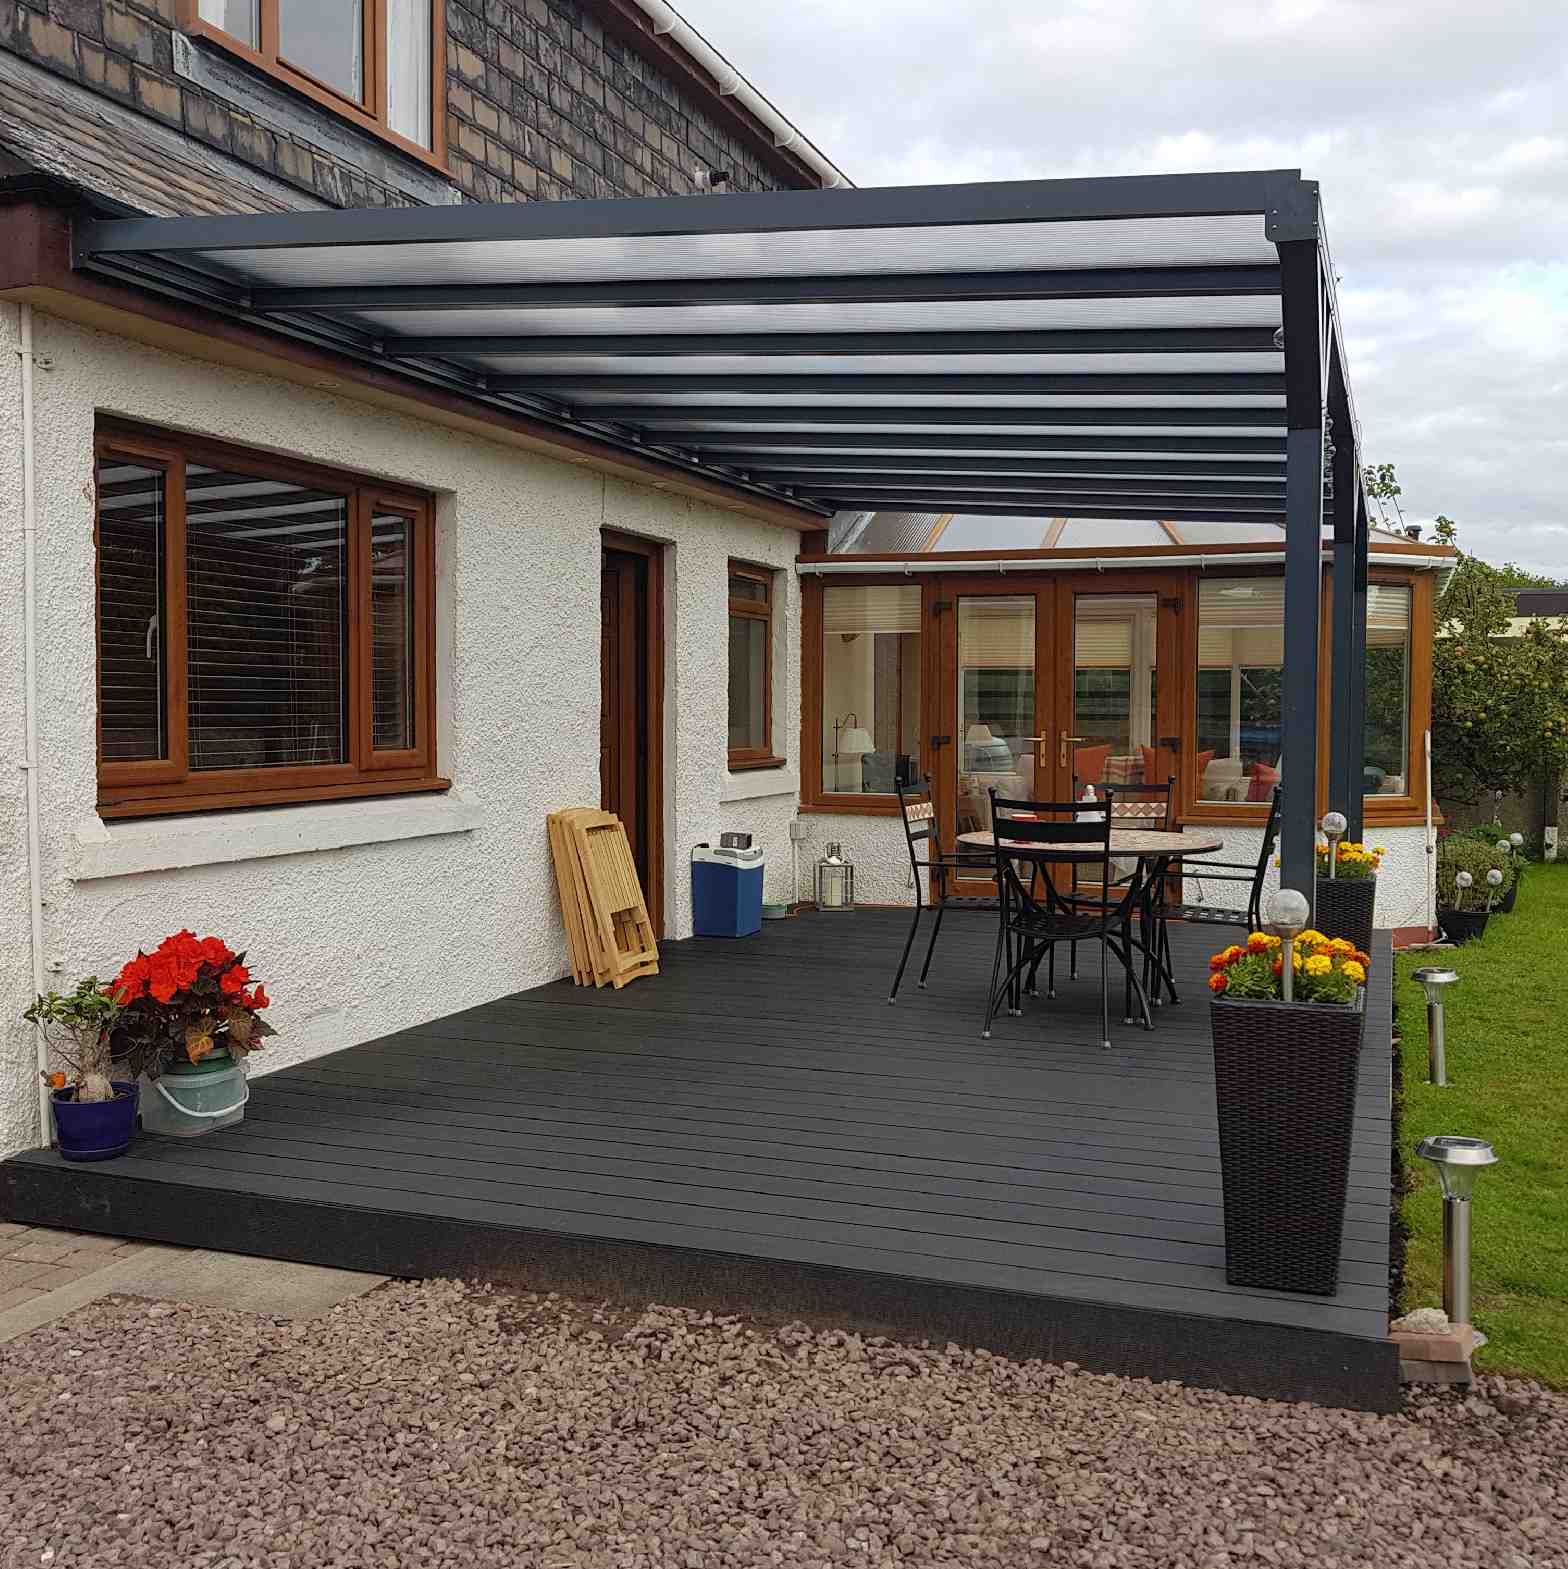 Buy Omega Verandah, Anthracite Grey, 16mm Polycarbonate Glazing - 11.8m (W) x 4.5m (P), (5) Supporting Posts online today